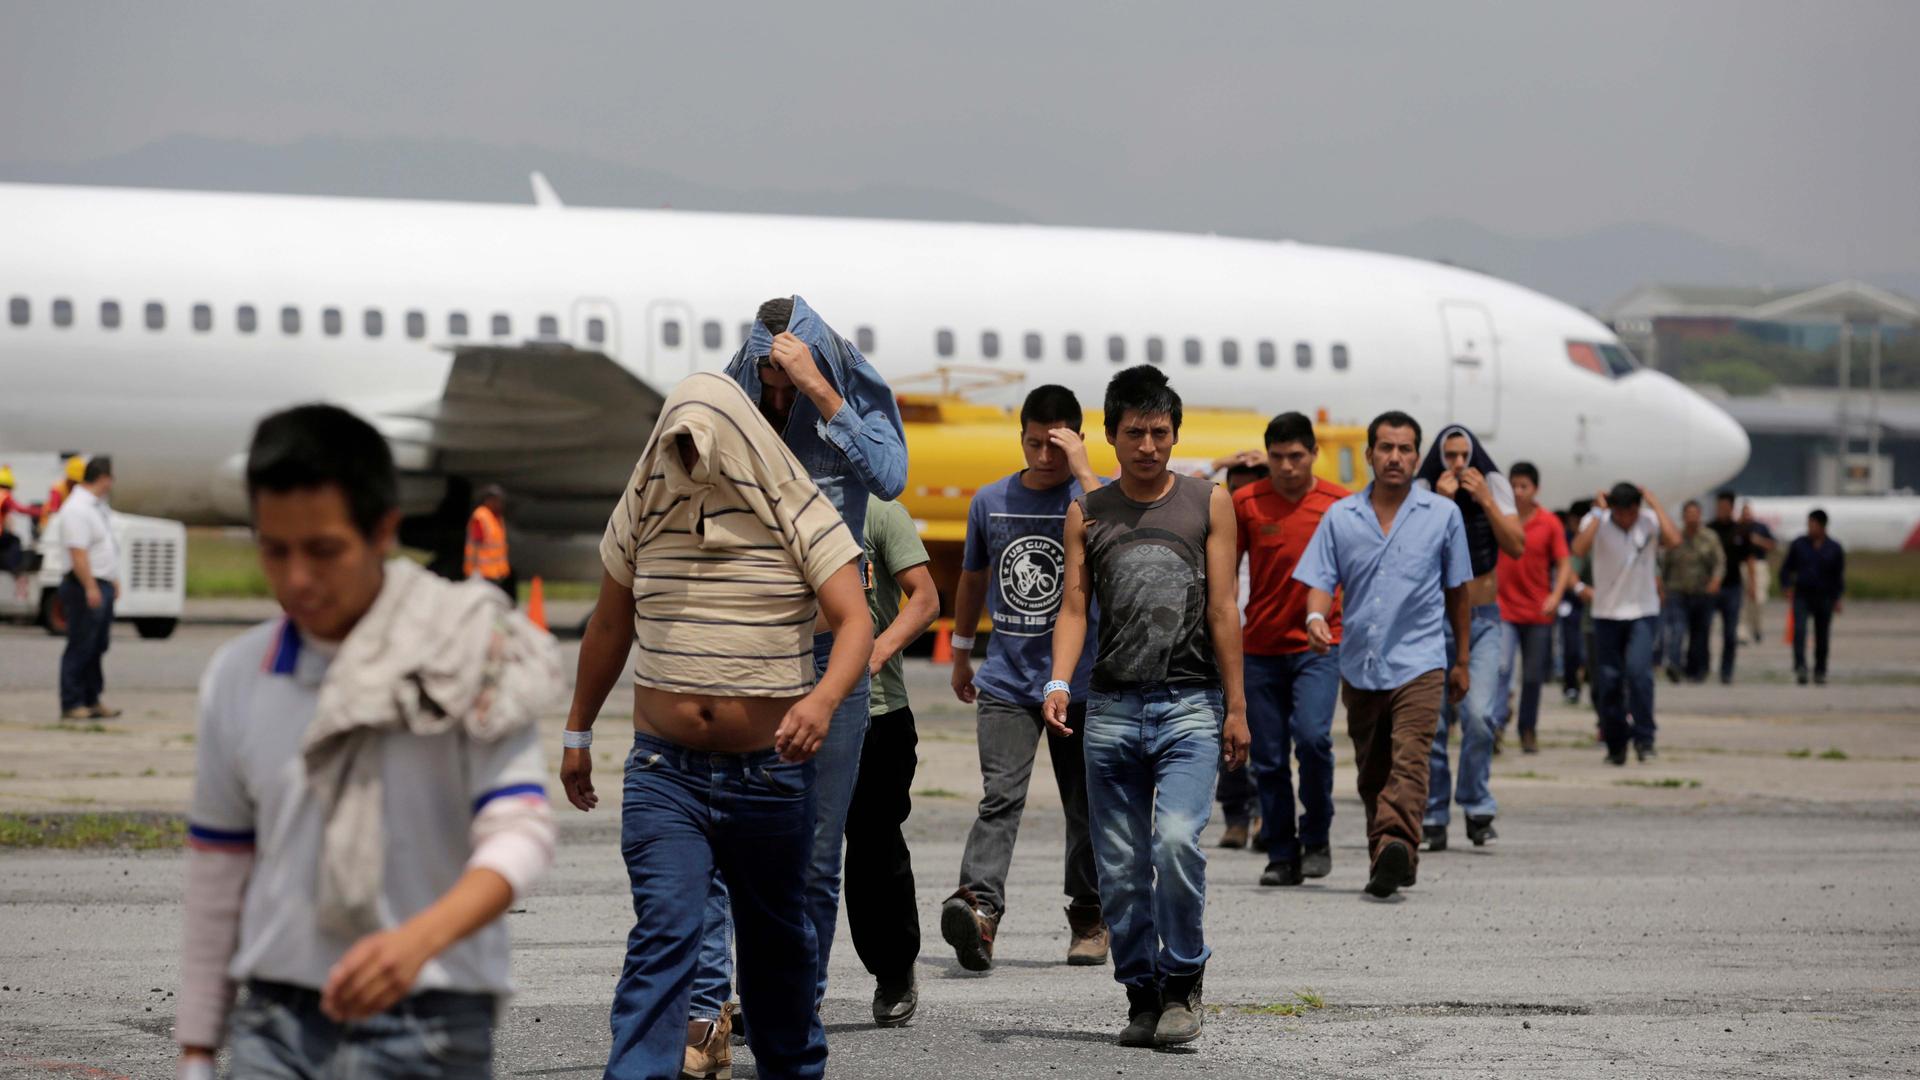 Deportees cross the tarmac after arriving on an immigration flight from the US at La Aurora international airport in Guatemala City, Guatemala, on Sept. 2, 2016.